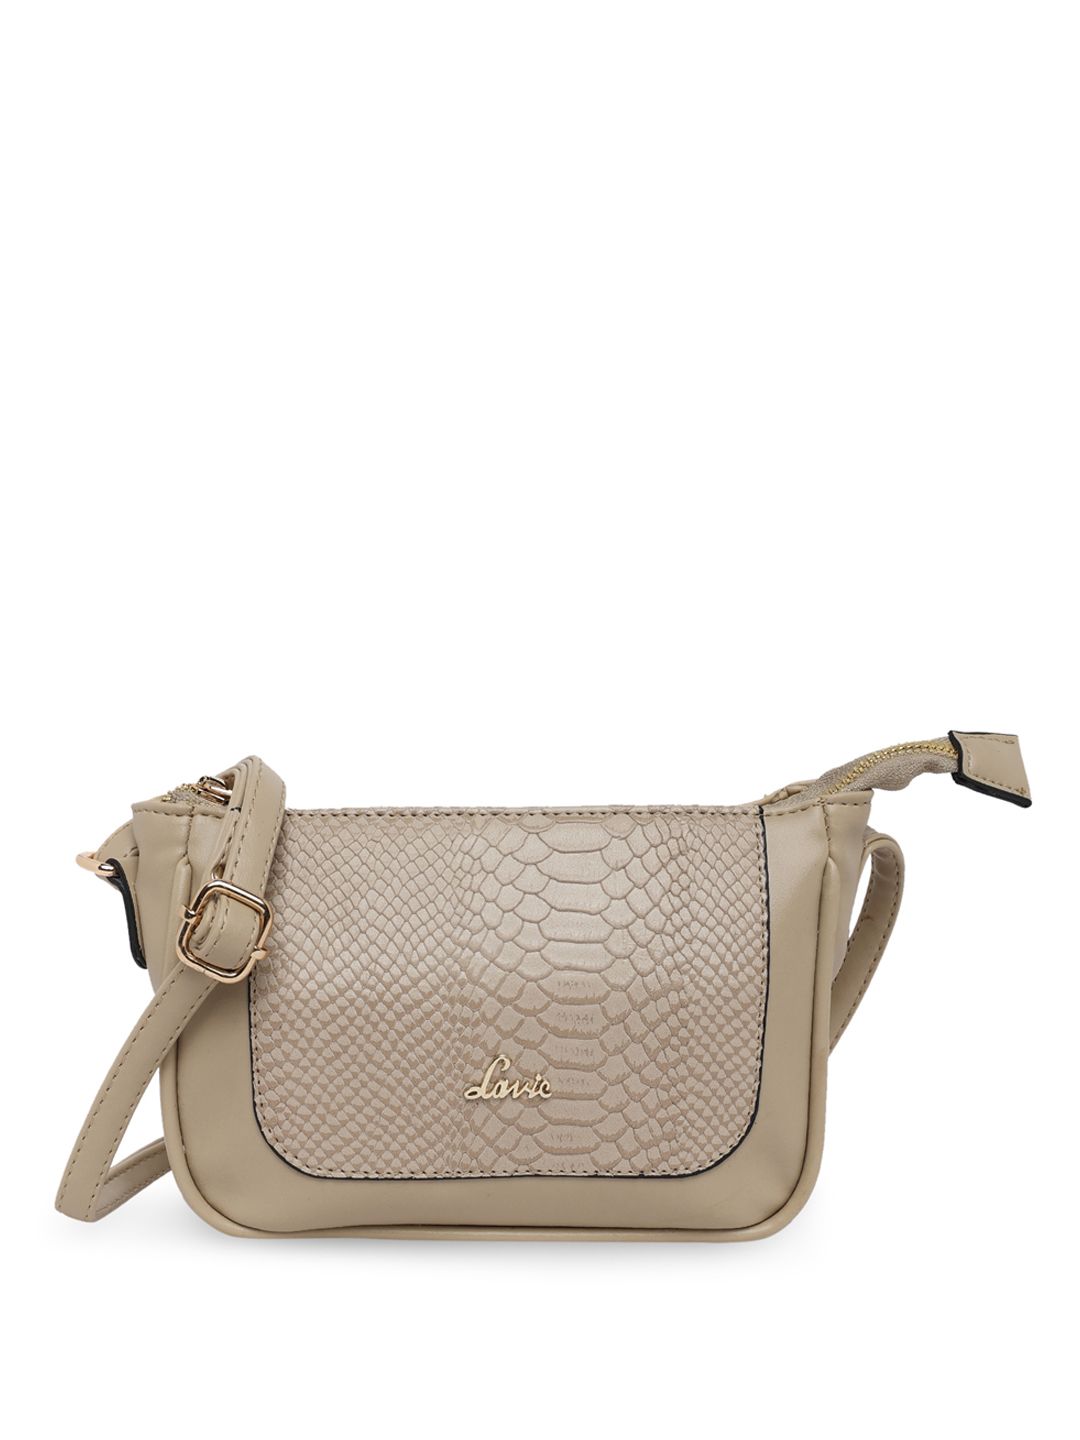 Lavie Pink & White Textured Sling Bag Price in India